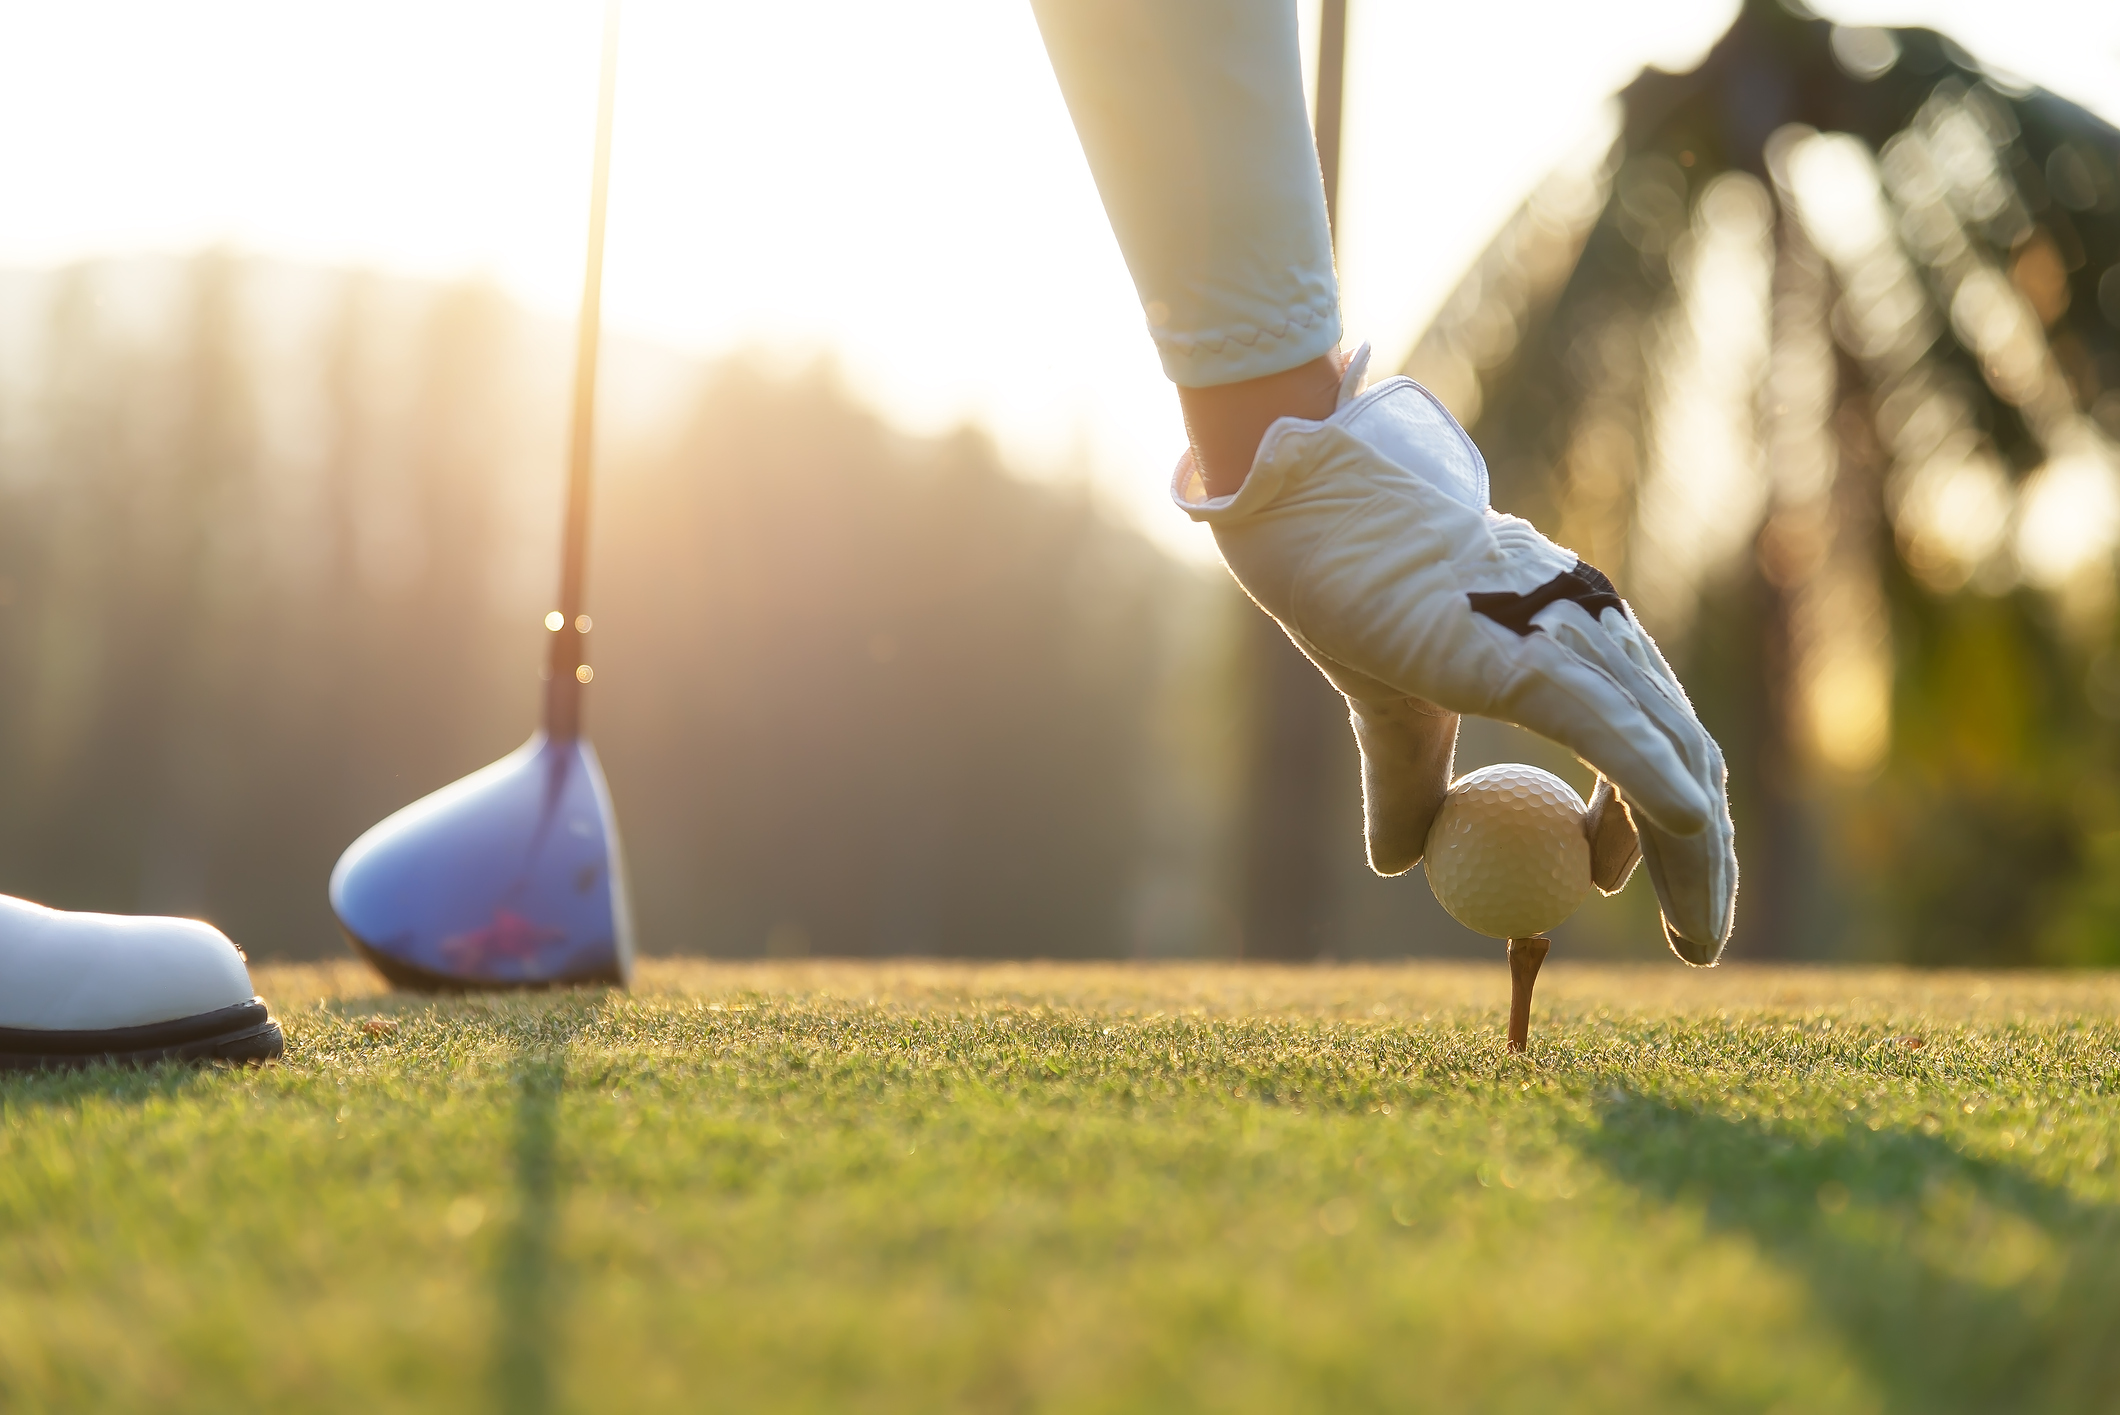 An image of a person wearing a white golf glove placing a golf ball onto a golfing tee.